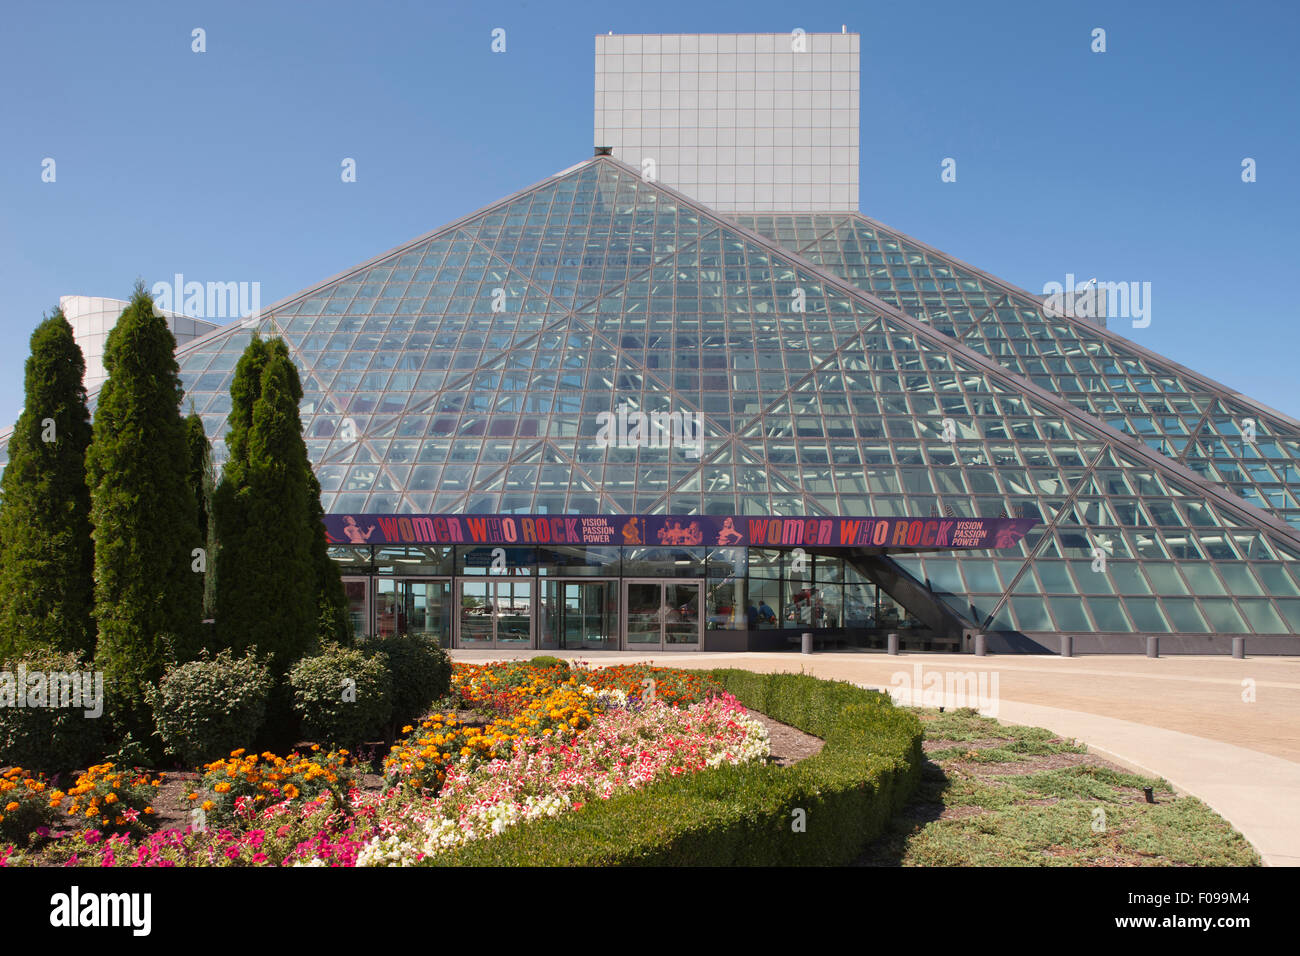 ROCK AND ROLL HALL OF FAME (©I M PEI 1995) WATERFRONT DOWNTOWN CLEVELAND OHIO USA Banque D'Images